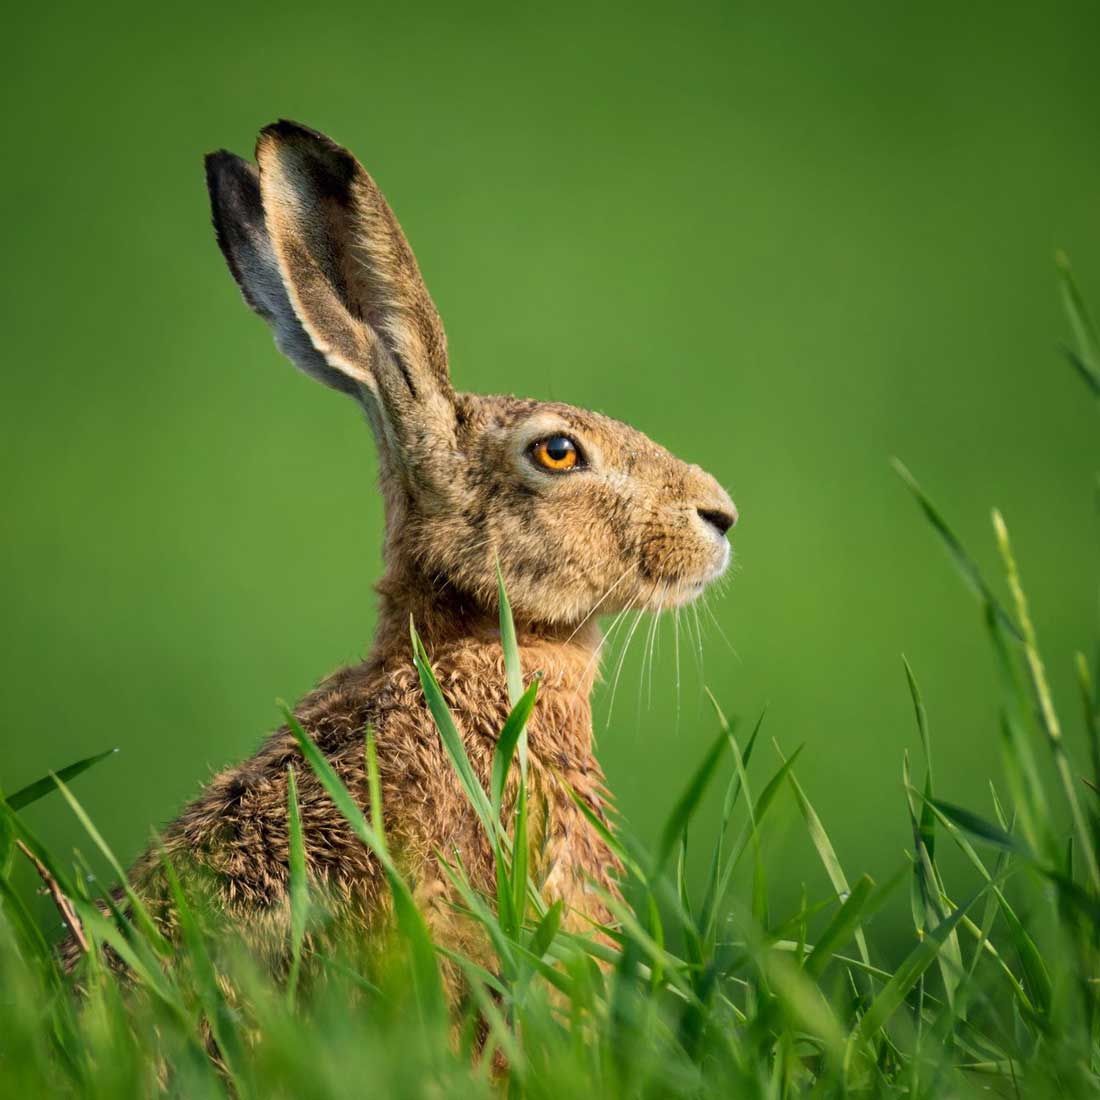 A hare with ears erect, partially hidden by long grass